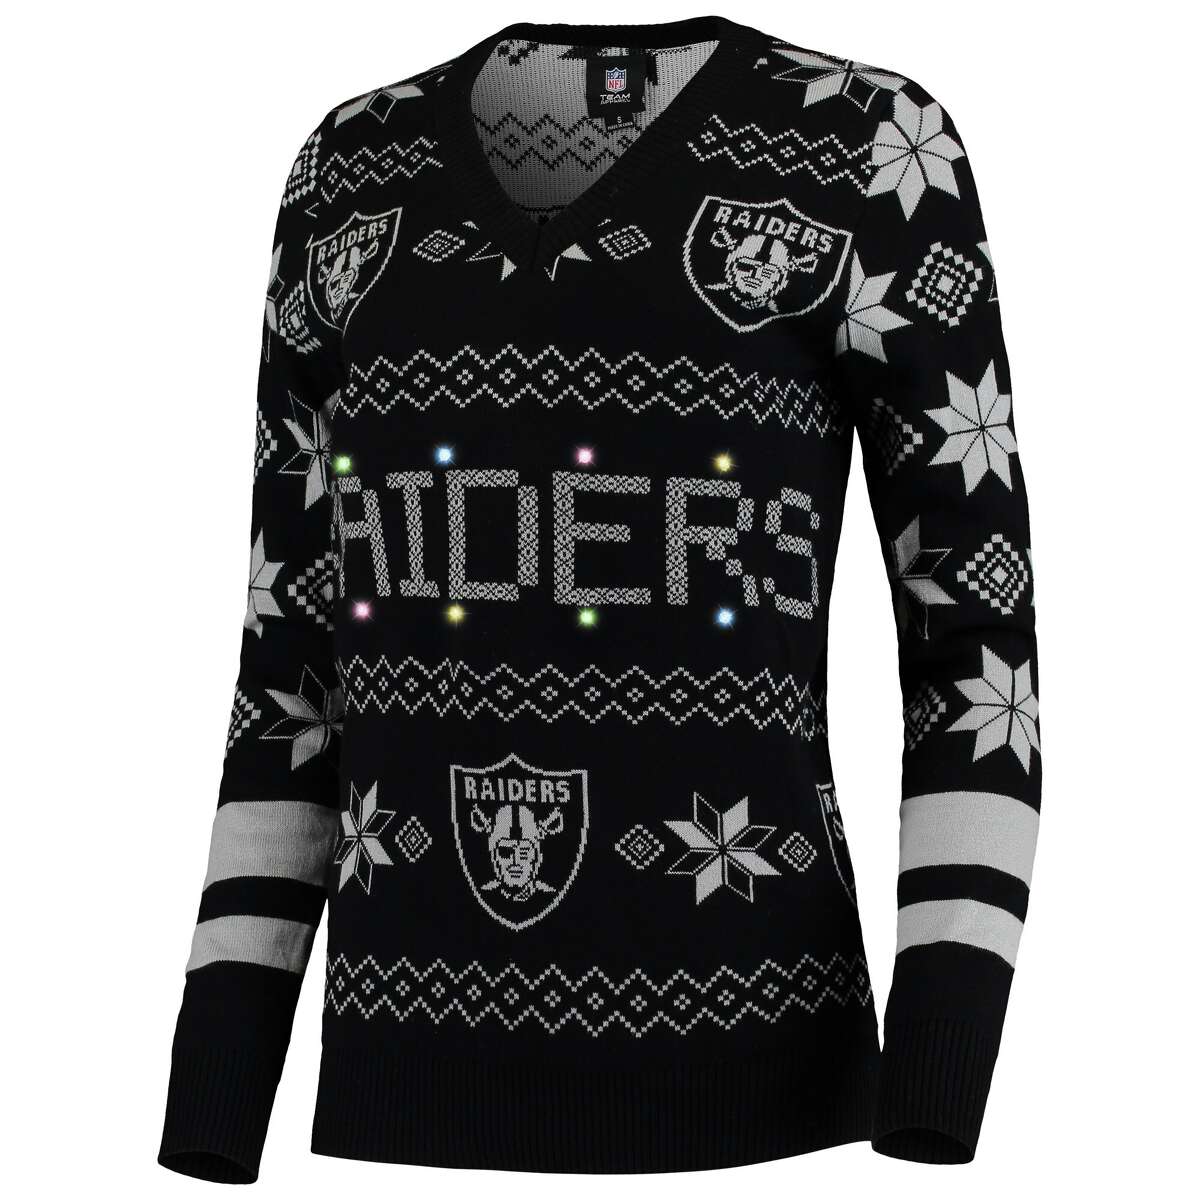 Bay Area ugly Christmas sweaters will make your holidays both brighter ...